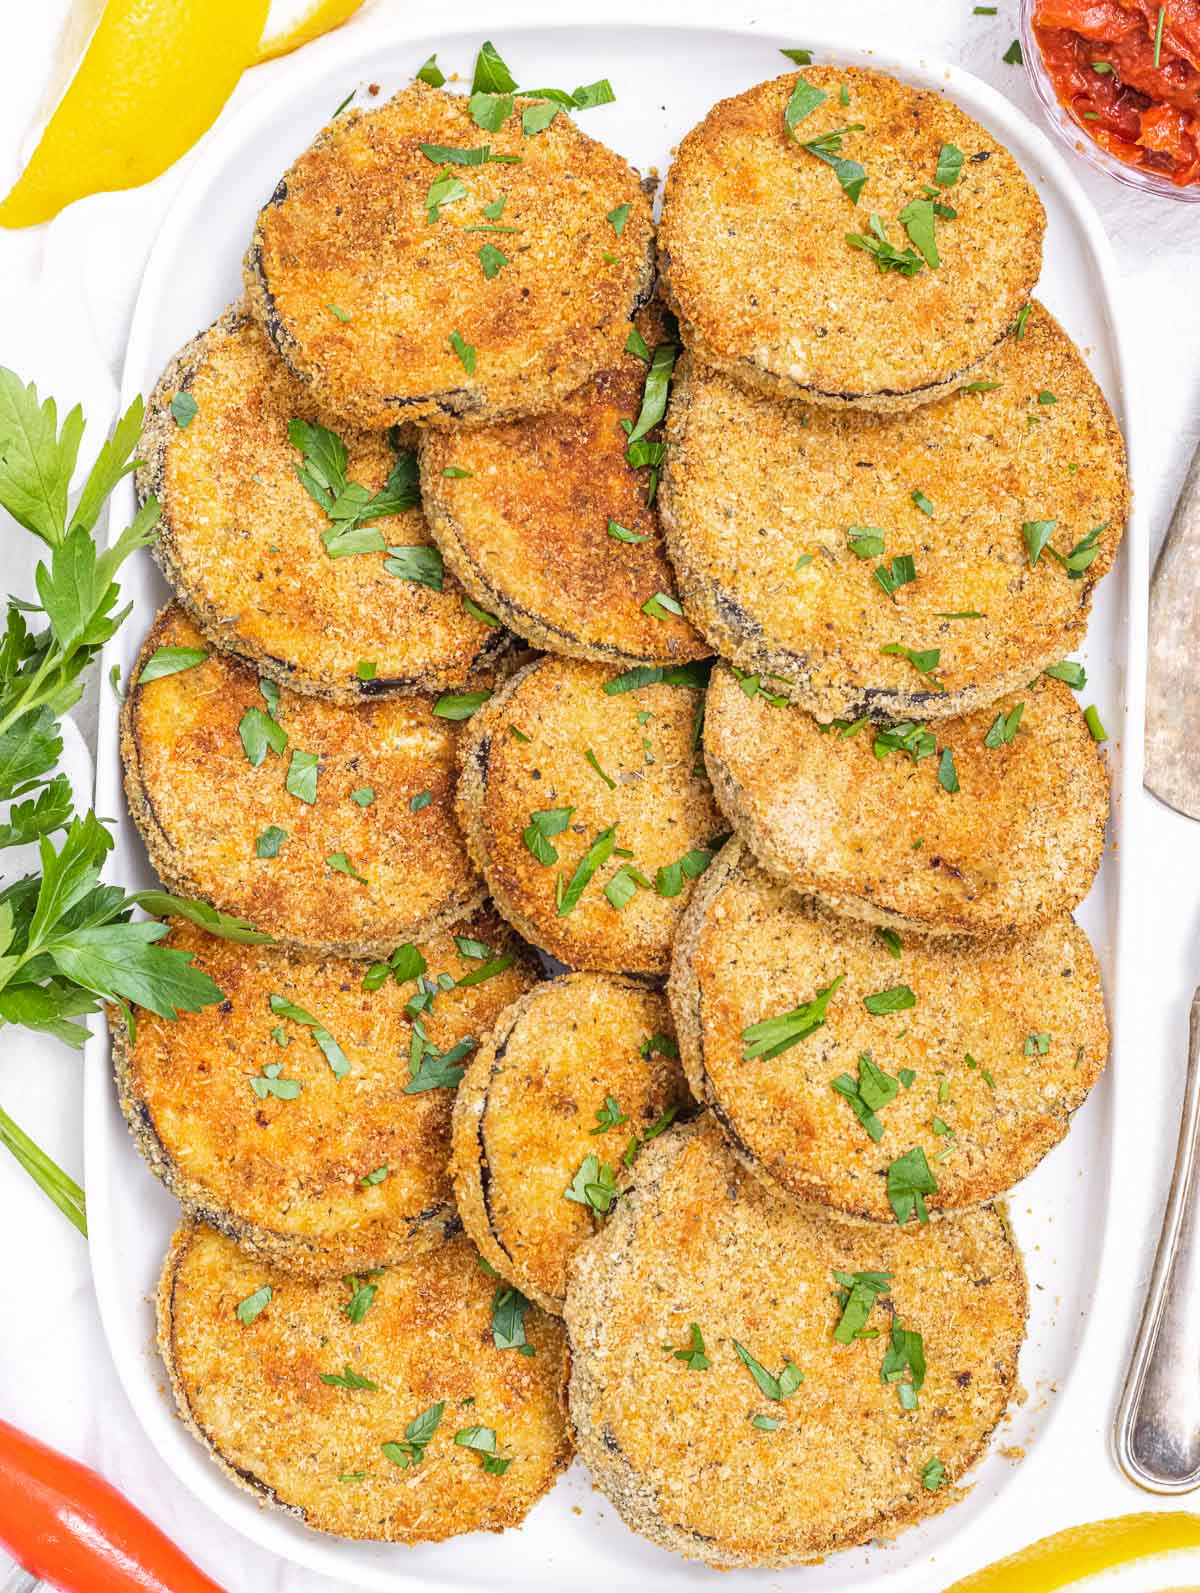 Breaded eggplant with parsley